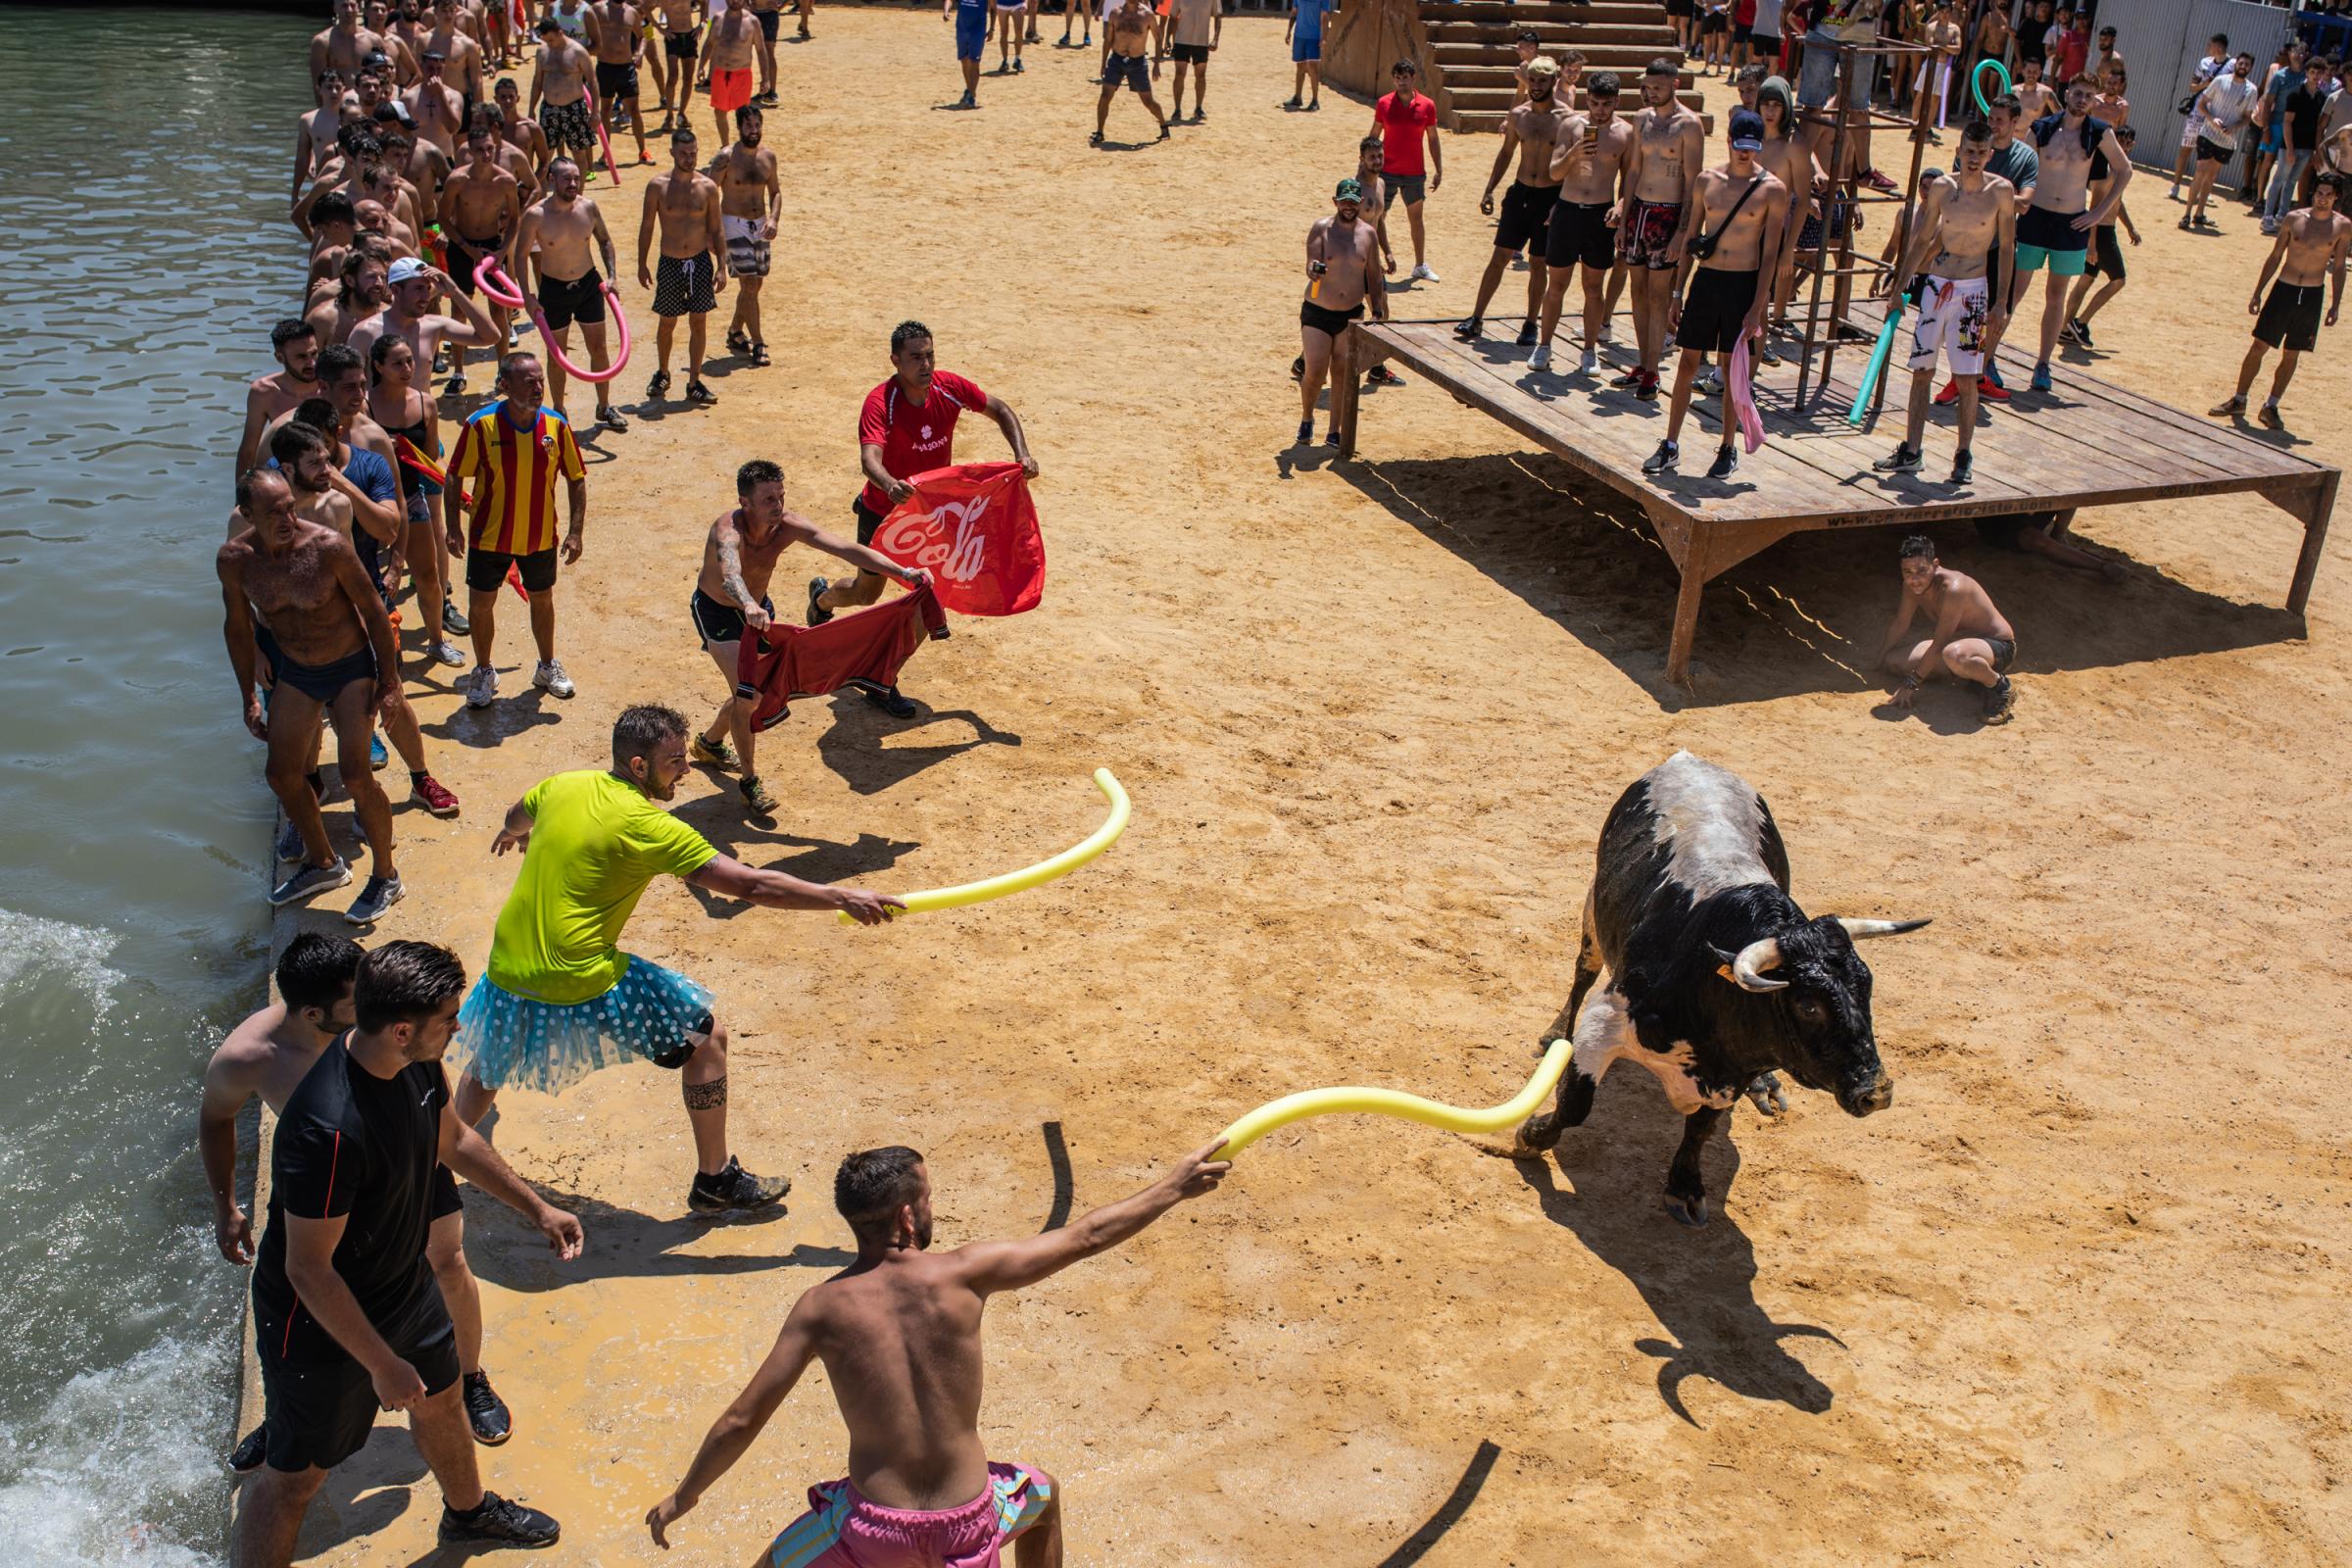 At 'Bous A La Mar', Revelers Take Plunge To Dodge Bulls And Beat The Heat - DENIA, SPAIN - JULY 17: Participants have fun with the...